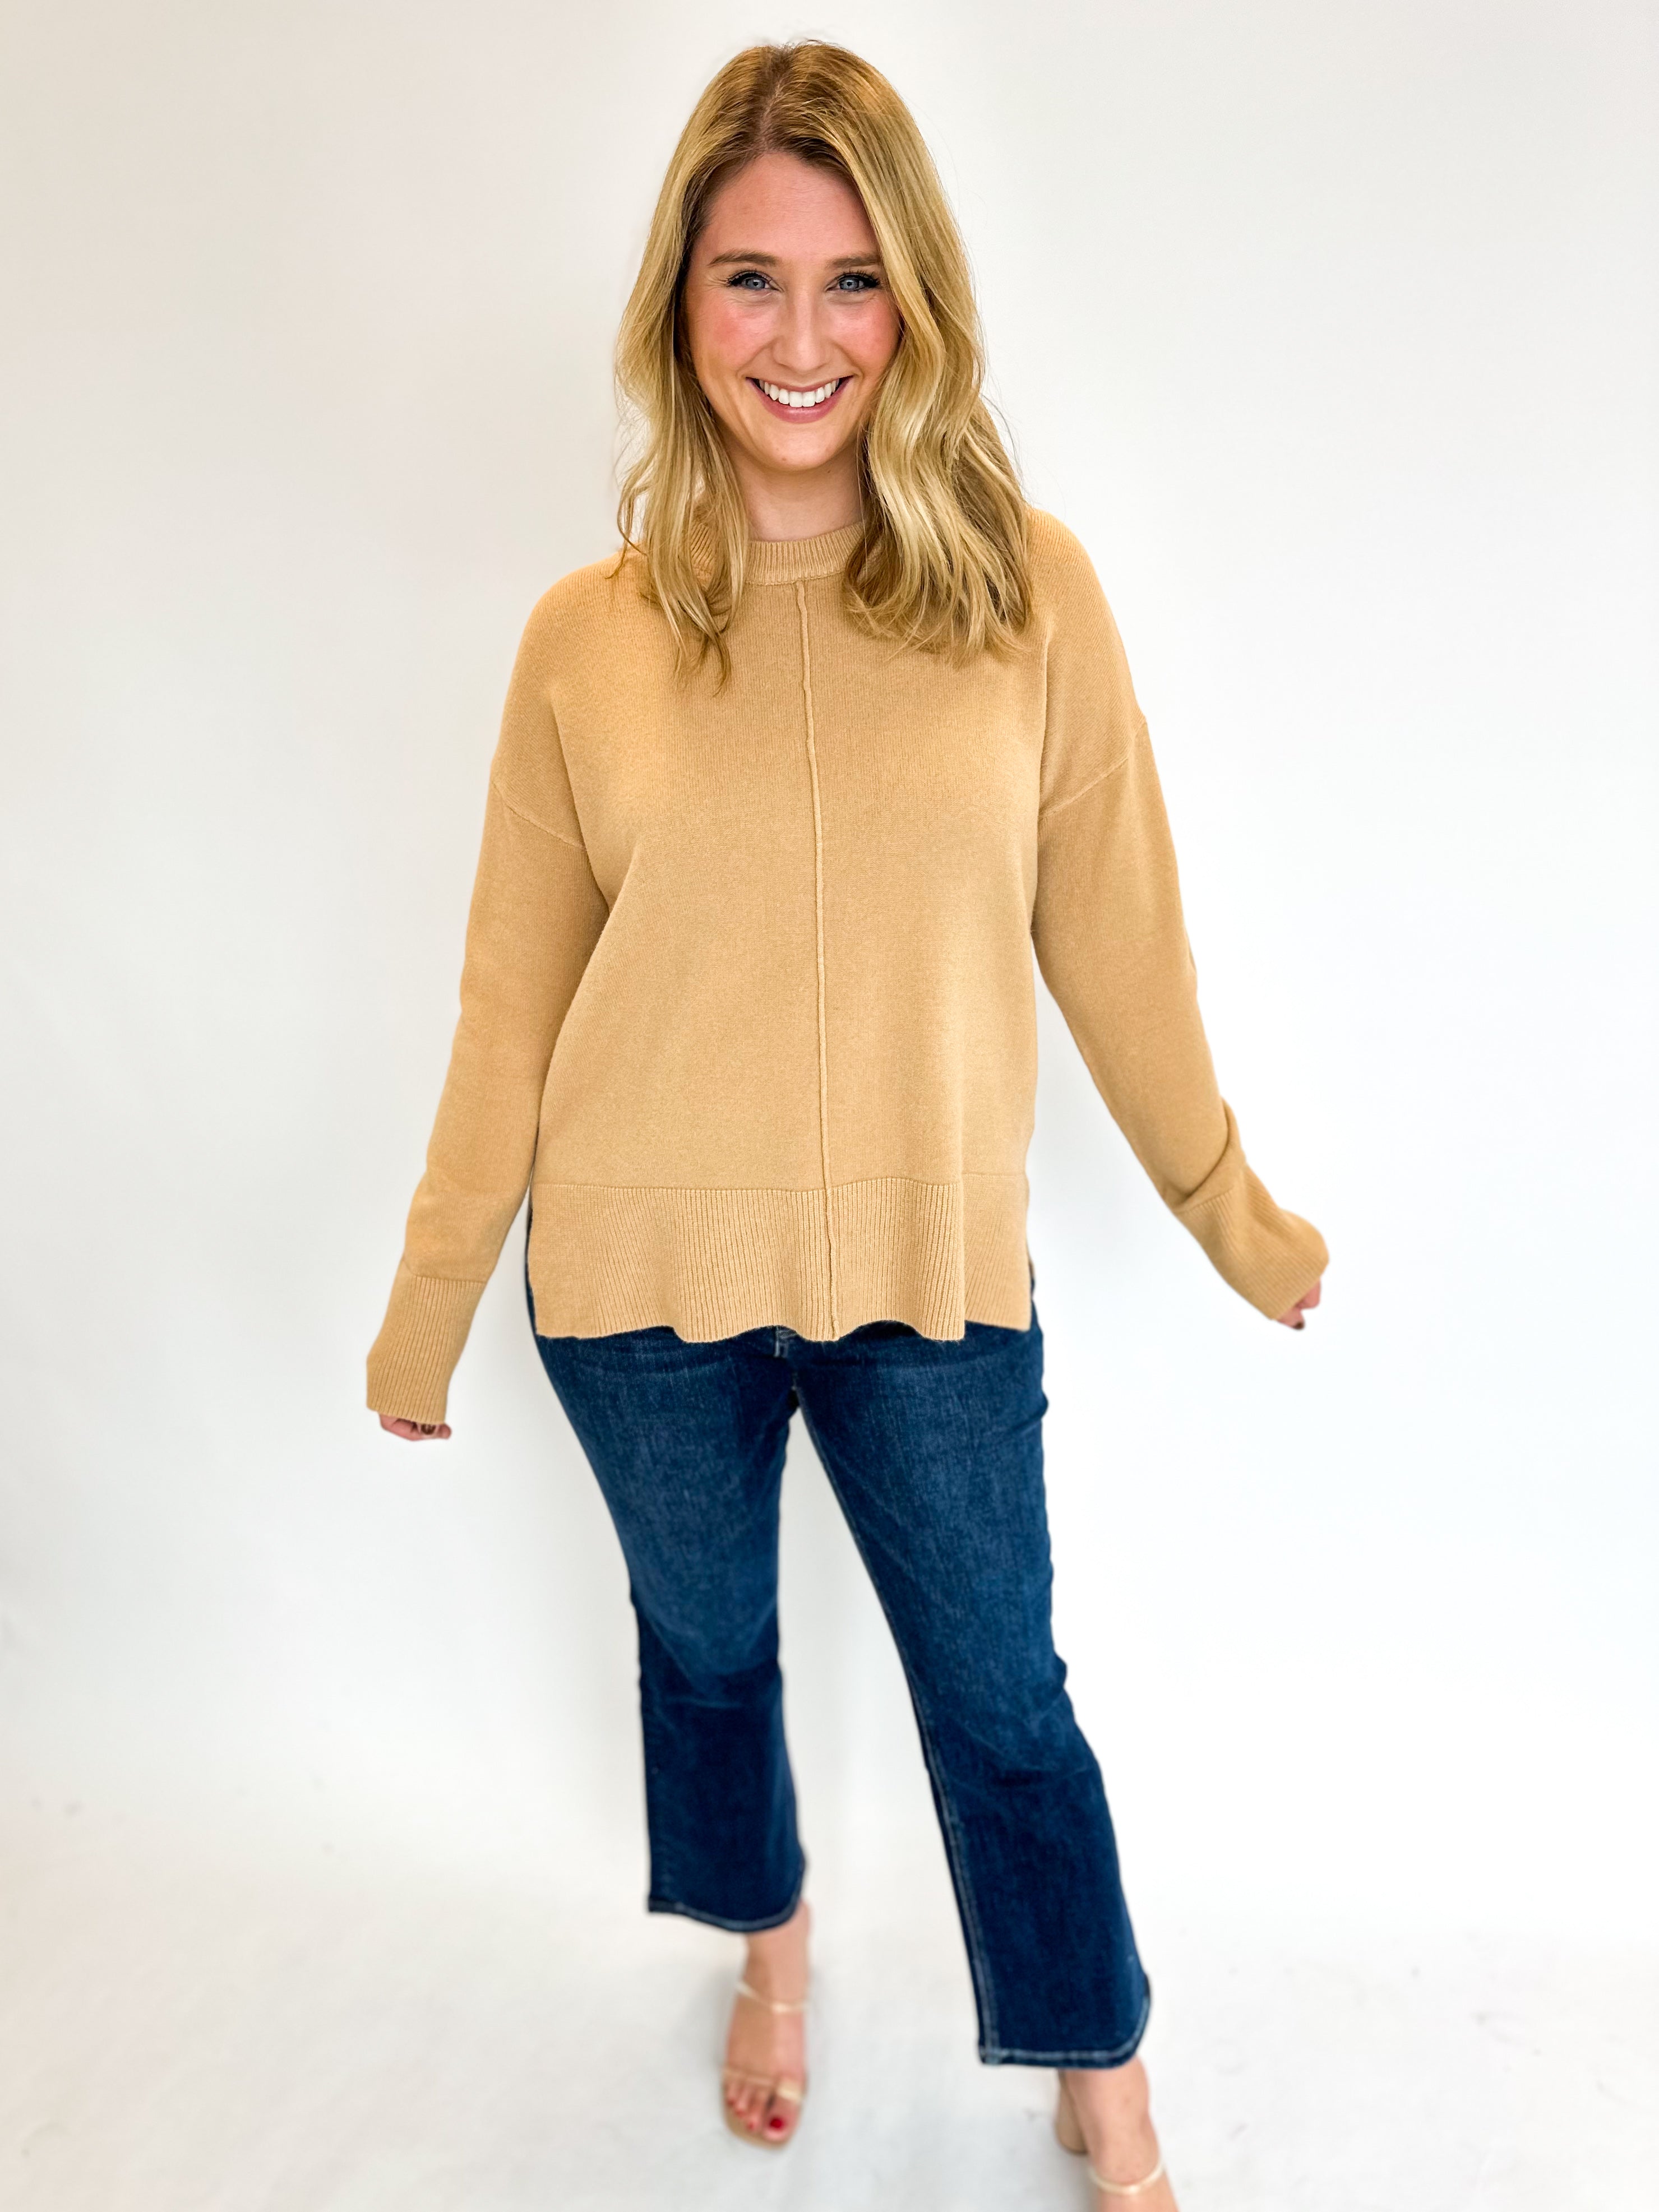 Cozy Days Lightweight Sweater Top - Taupe-230 Sweaters/Cardis-&MERCI-July & June Women's Fashion Boutique Located in San Antonio, Texas